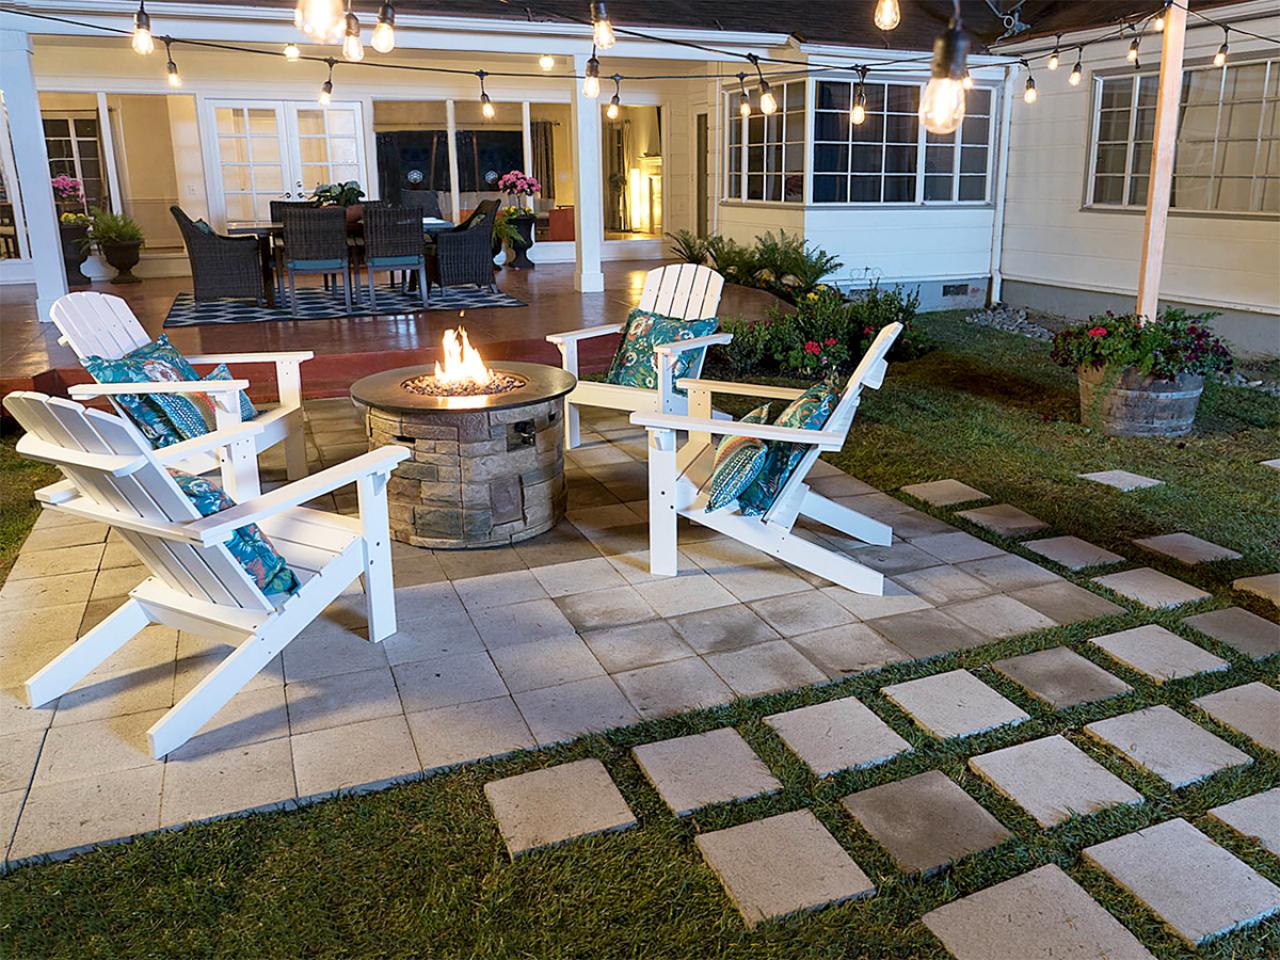 How To Lay A Paver Patio For Firepit, Can You Put A Fire Pit On Patio